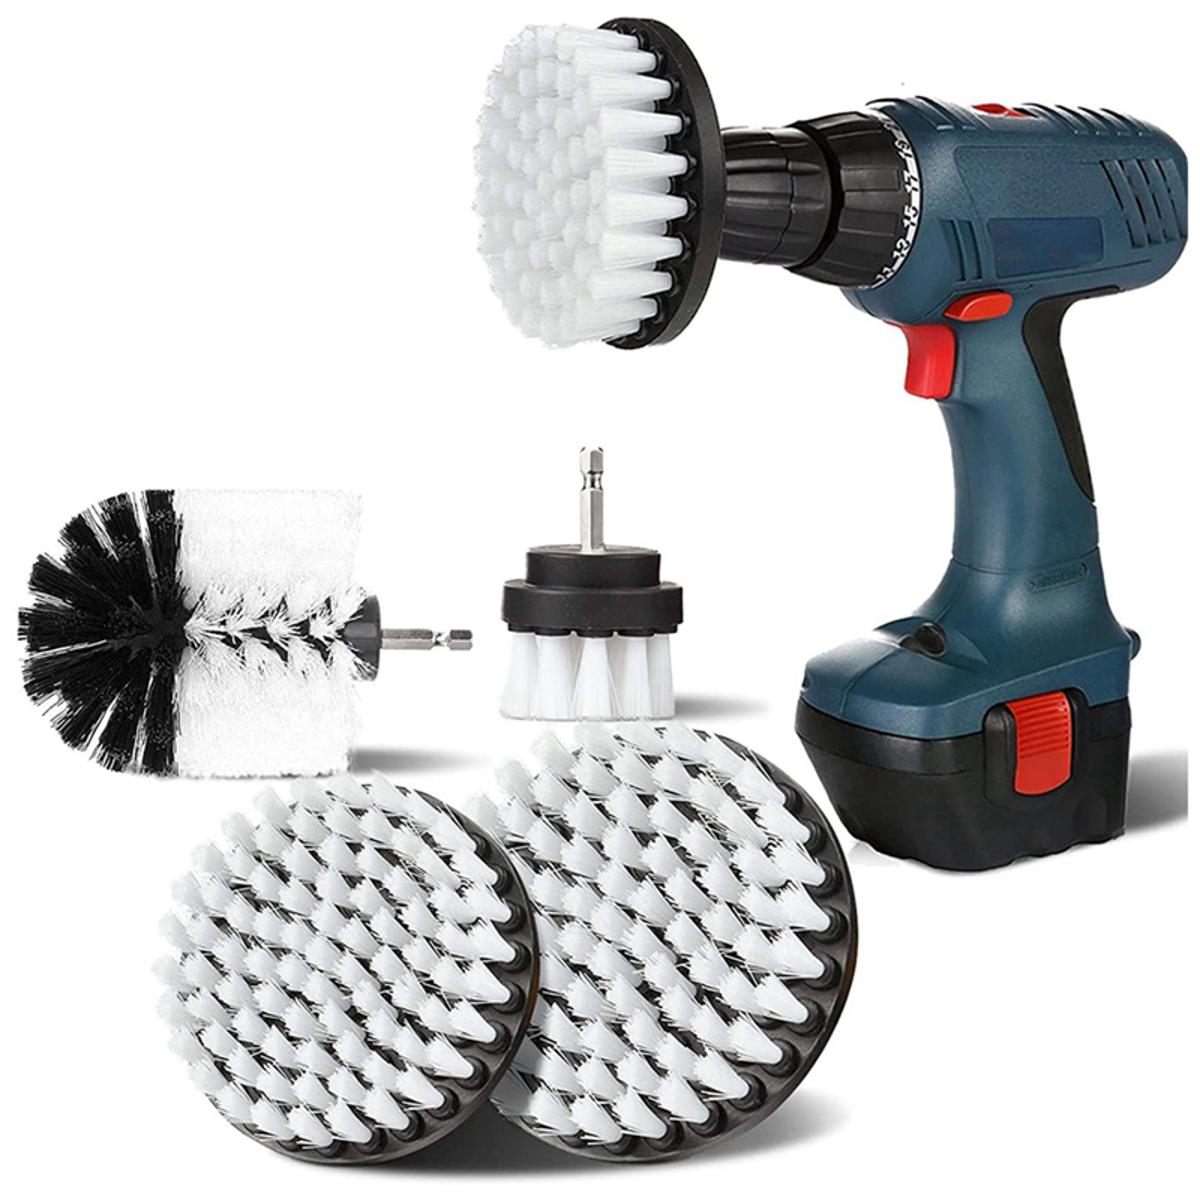 Buy Sofa Carpet Cleaning Brush at the Best Price in Pakistan